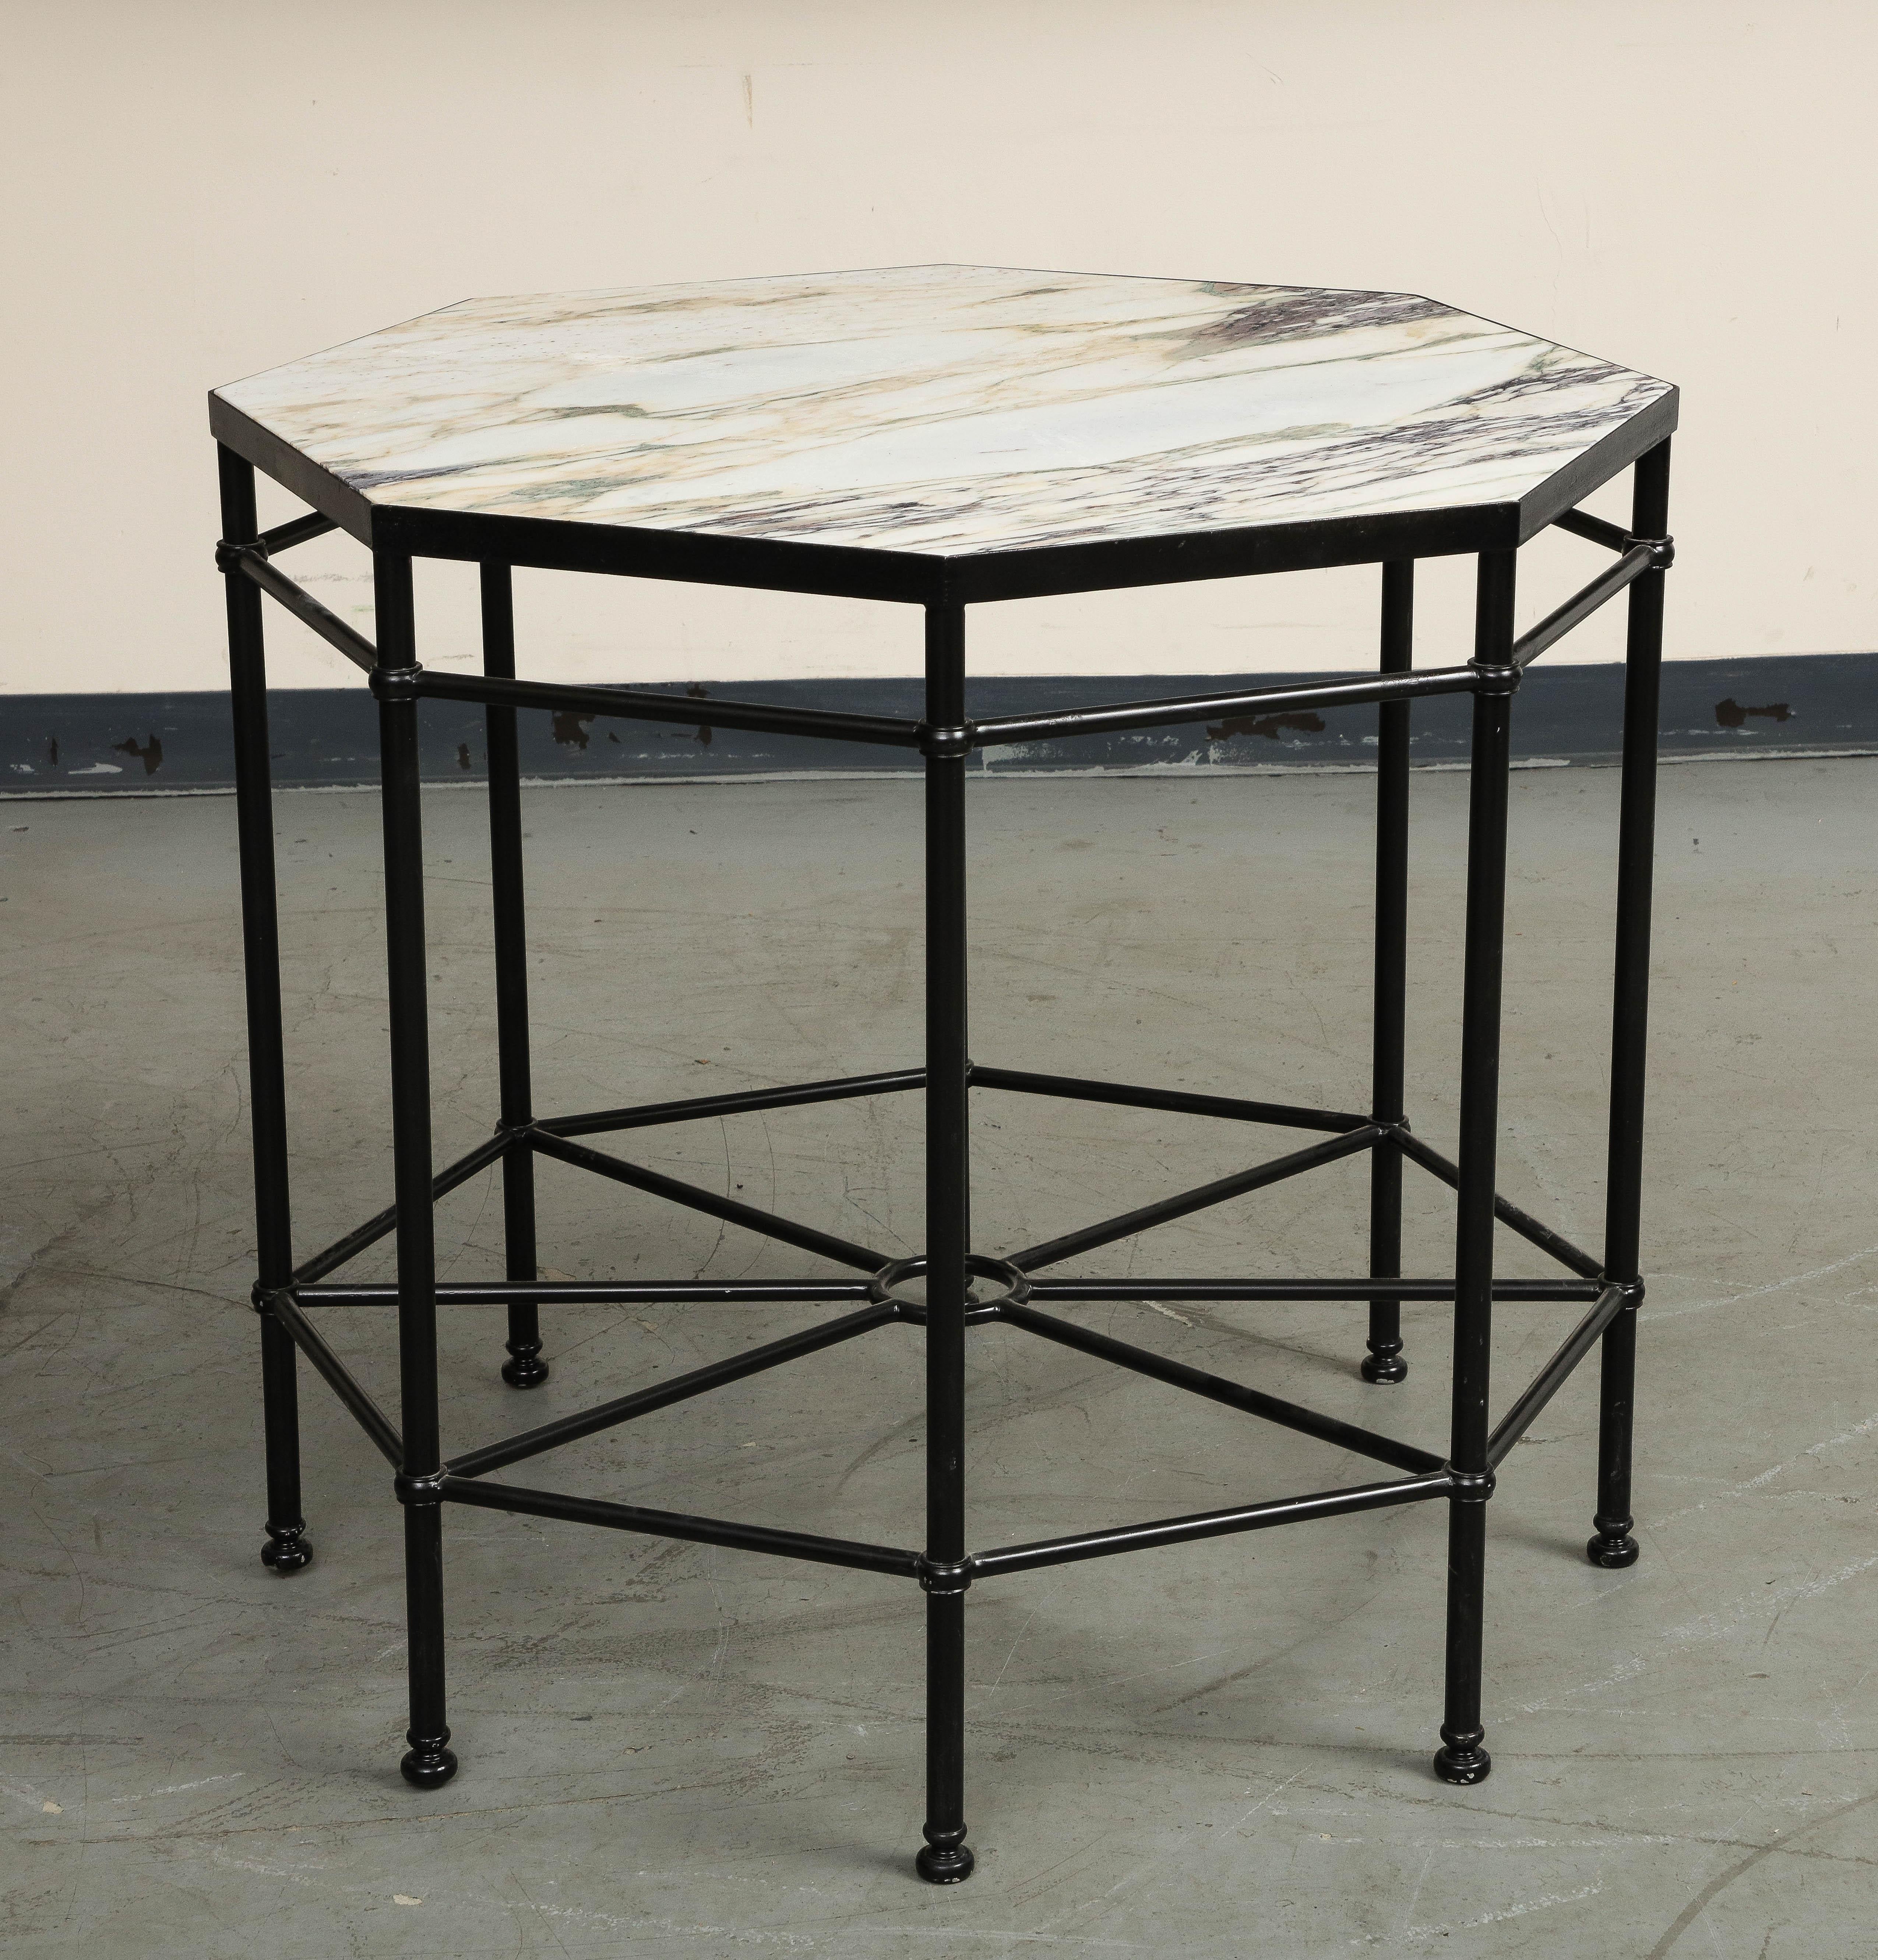 20th Century Octagonal Black Painted Steel Table with New Violetta Marble Top 1